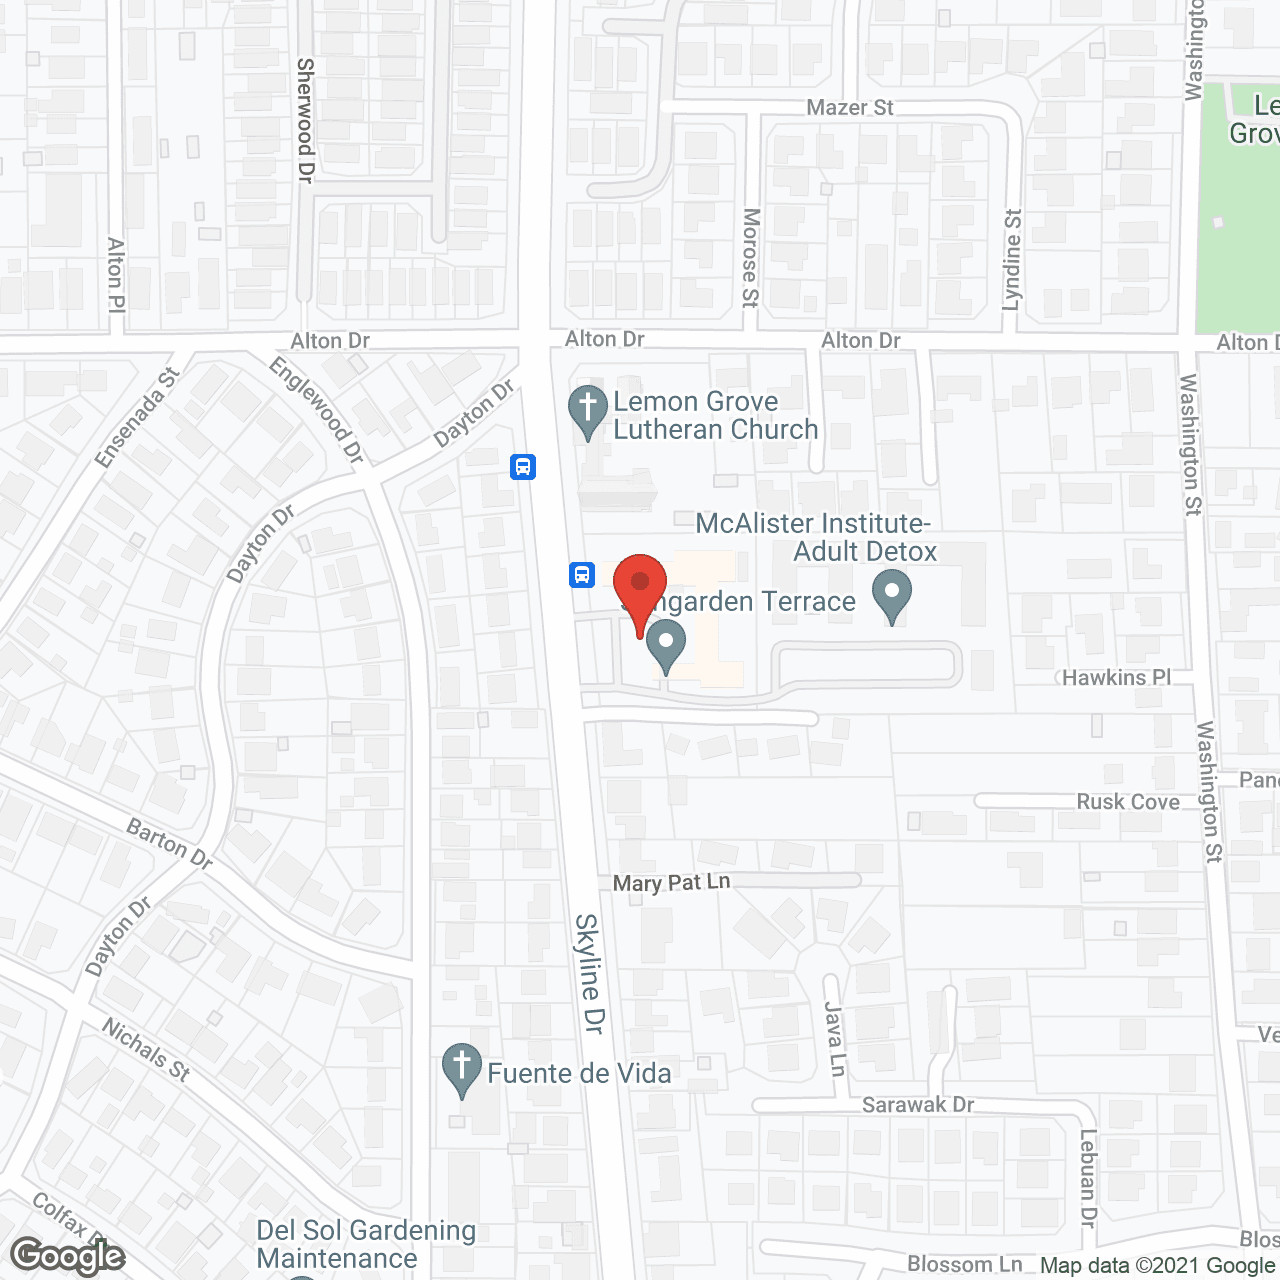 Sungarden Terrace Assisted Living and Memory Care in google map